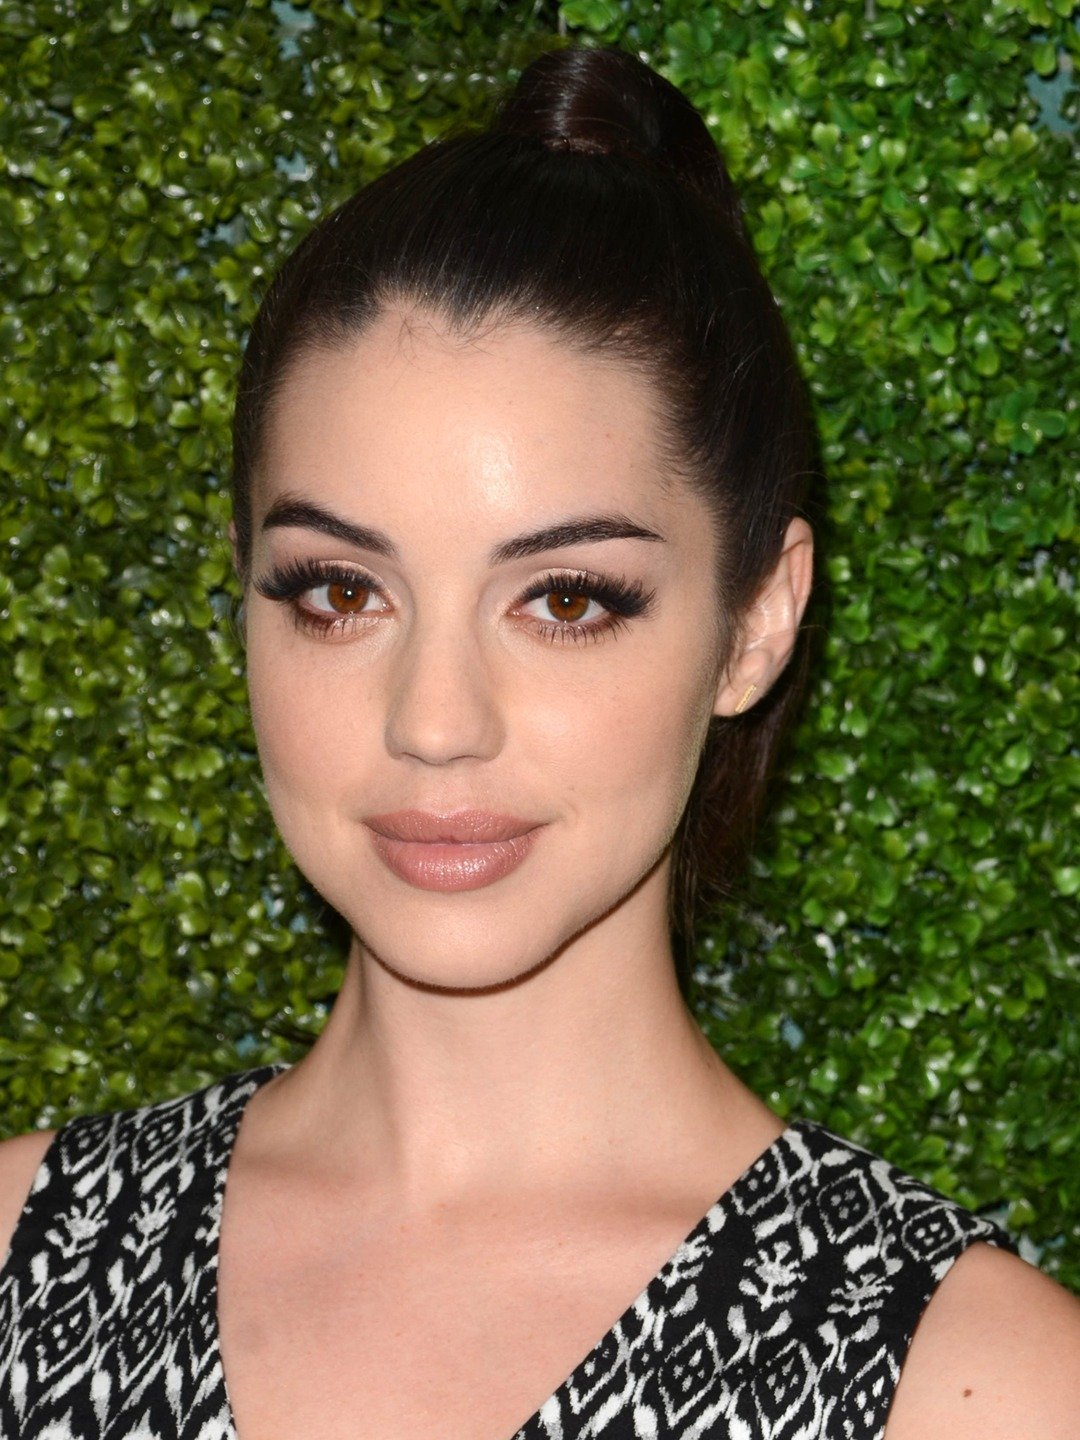 Adelaide kane movies and tv shows